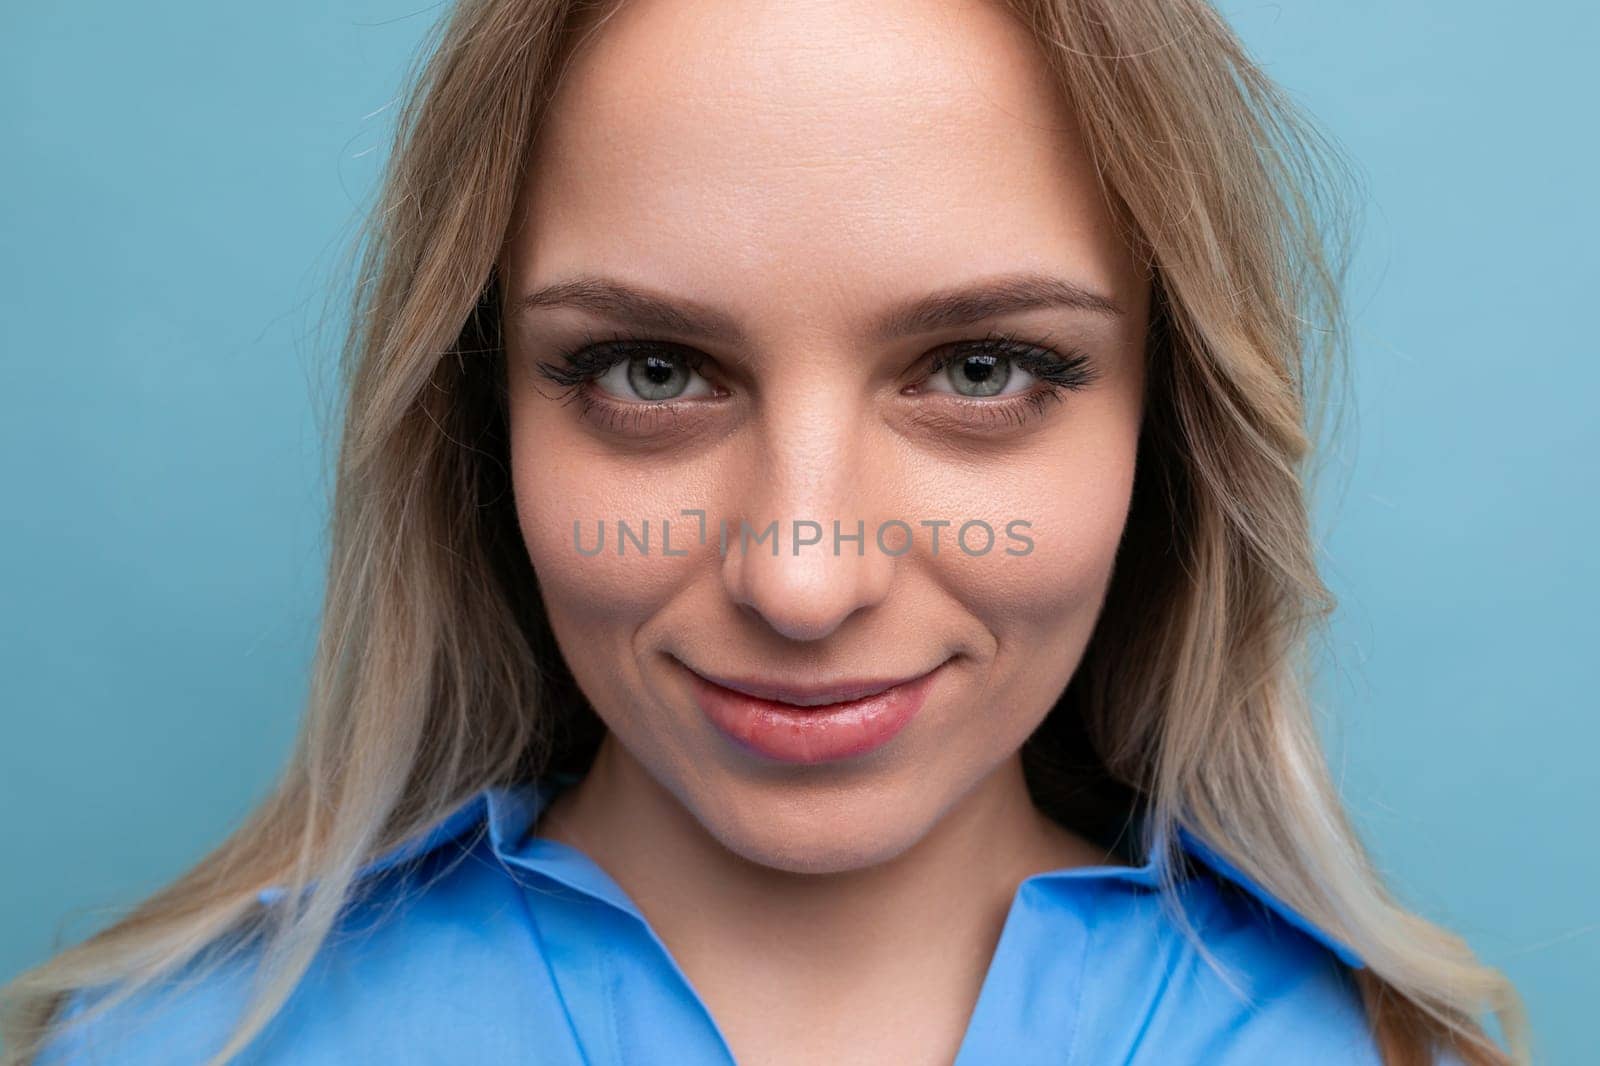 portrait of an adorable blonde young woman cutely closing her eyes on a blue background.